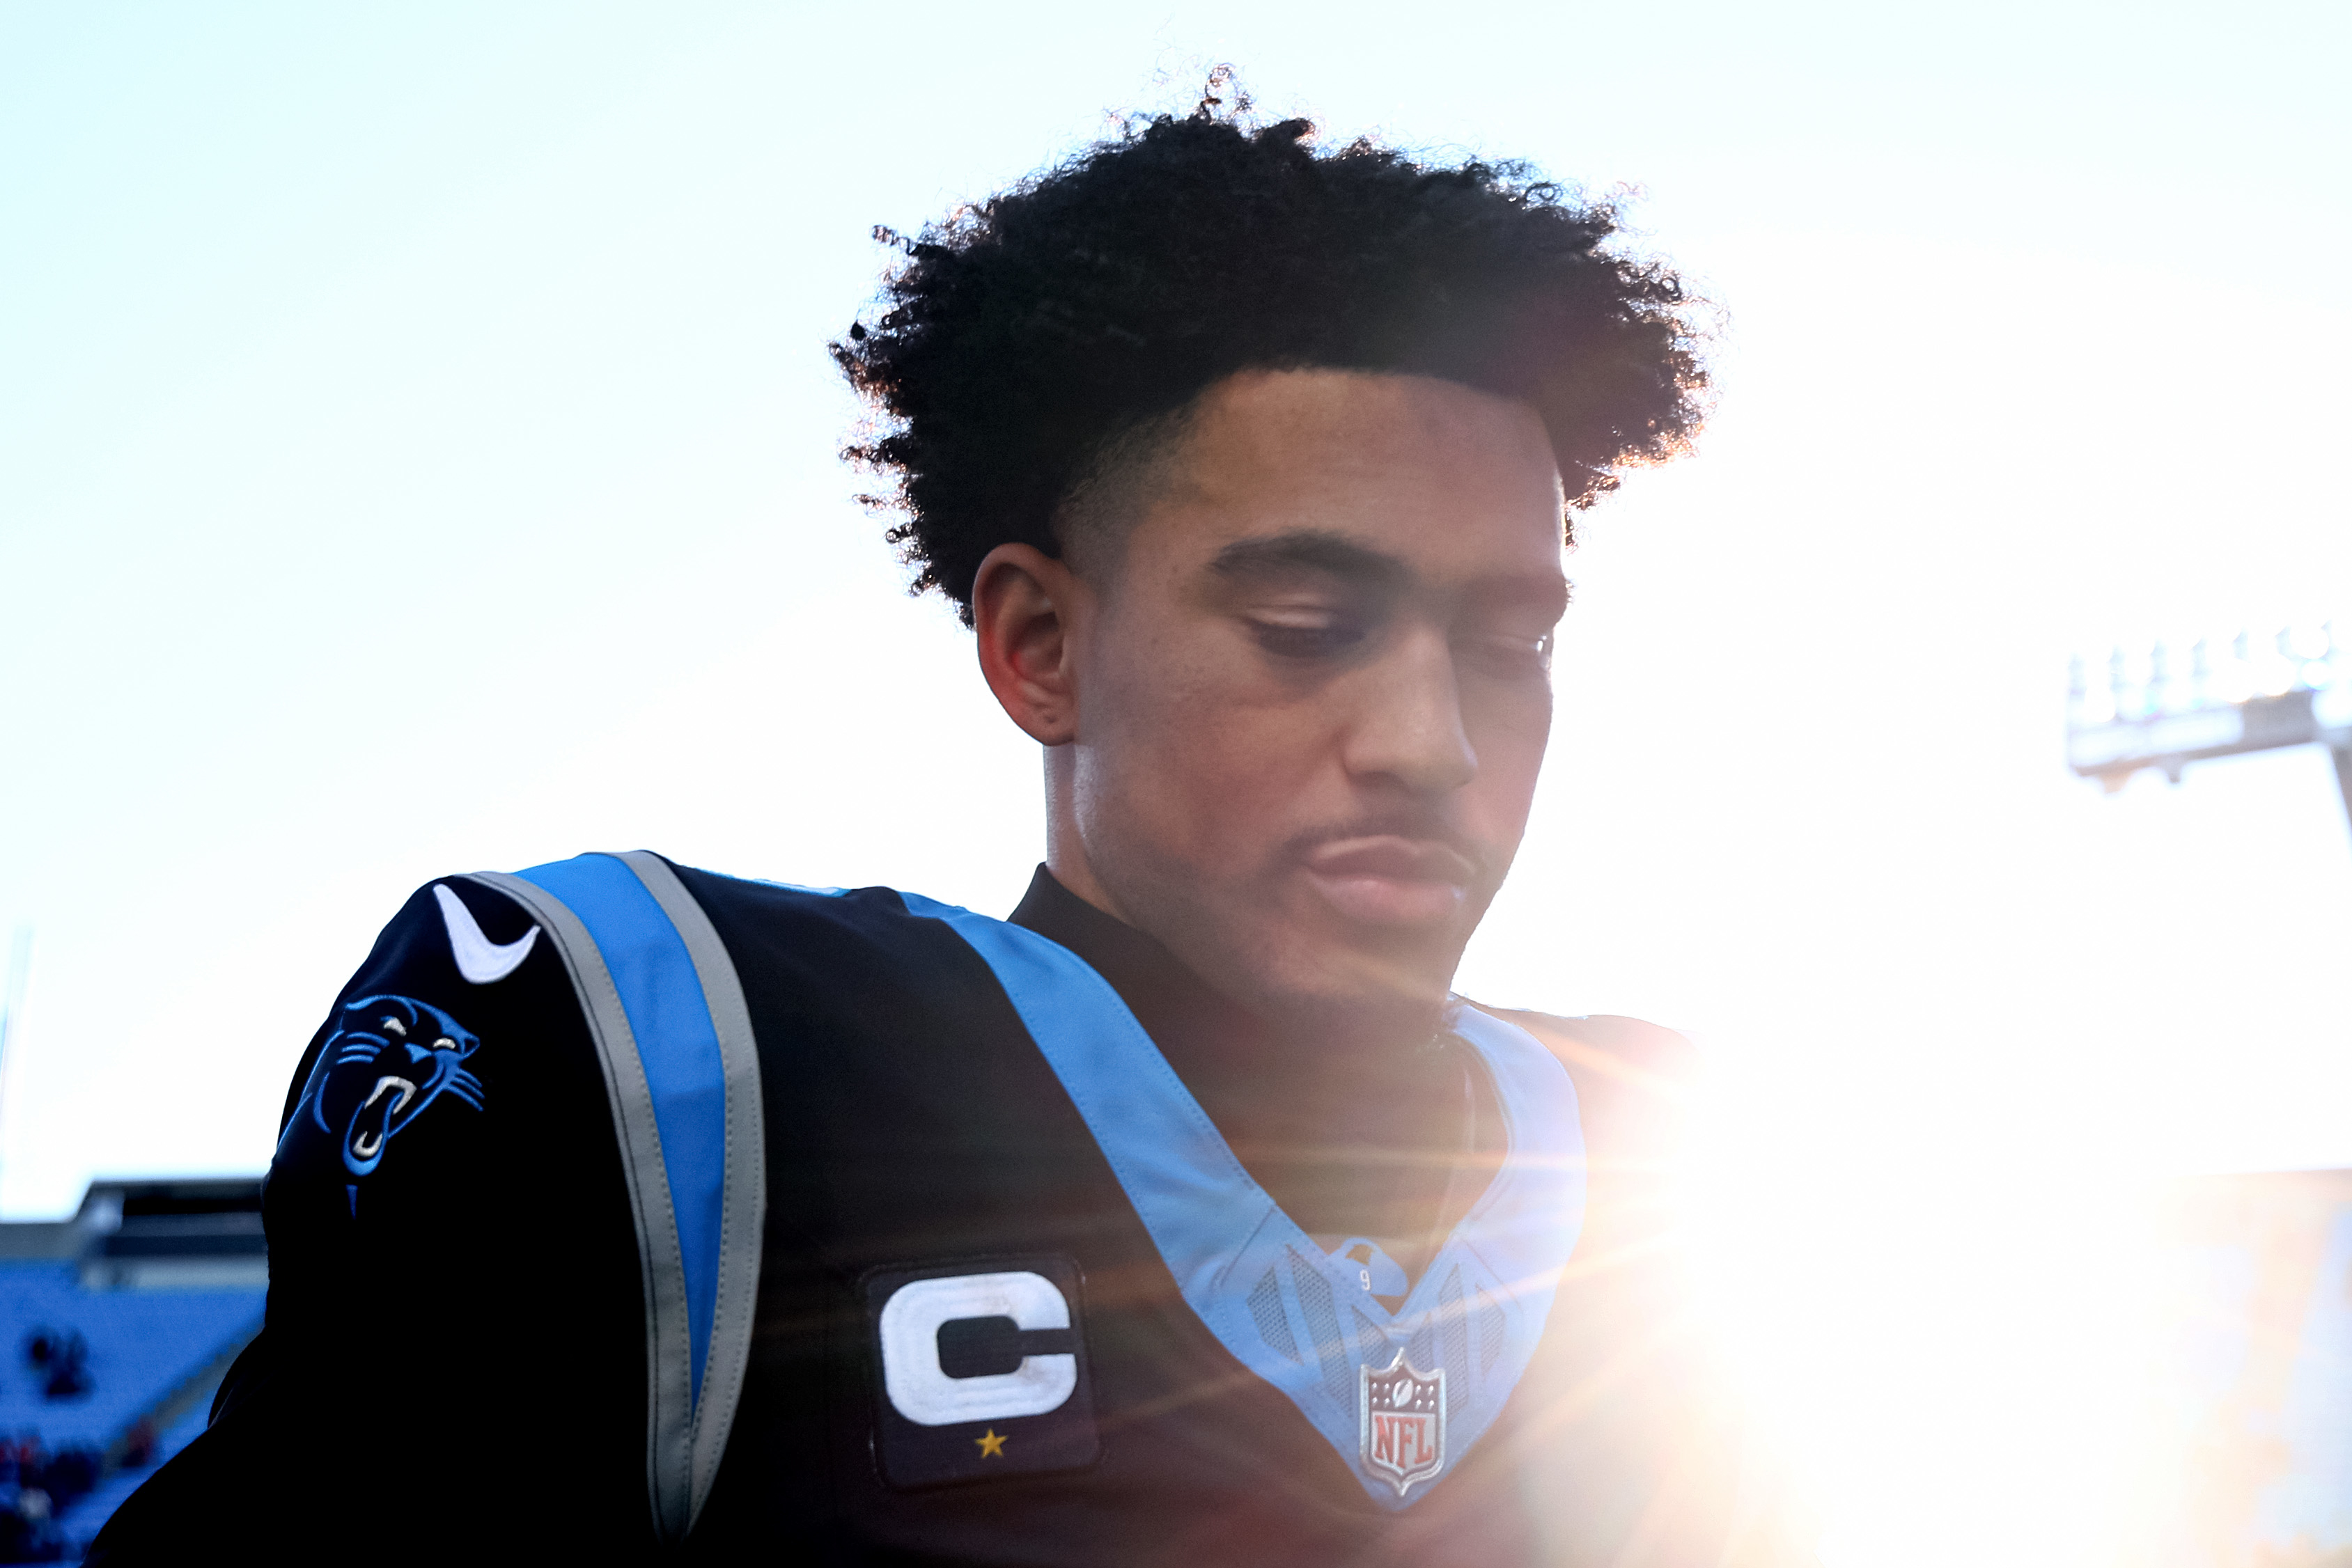 Football player in a jersey with a captain&#x27;s patch, standing in sunlight, introspective expression